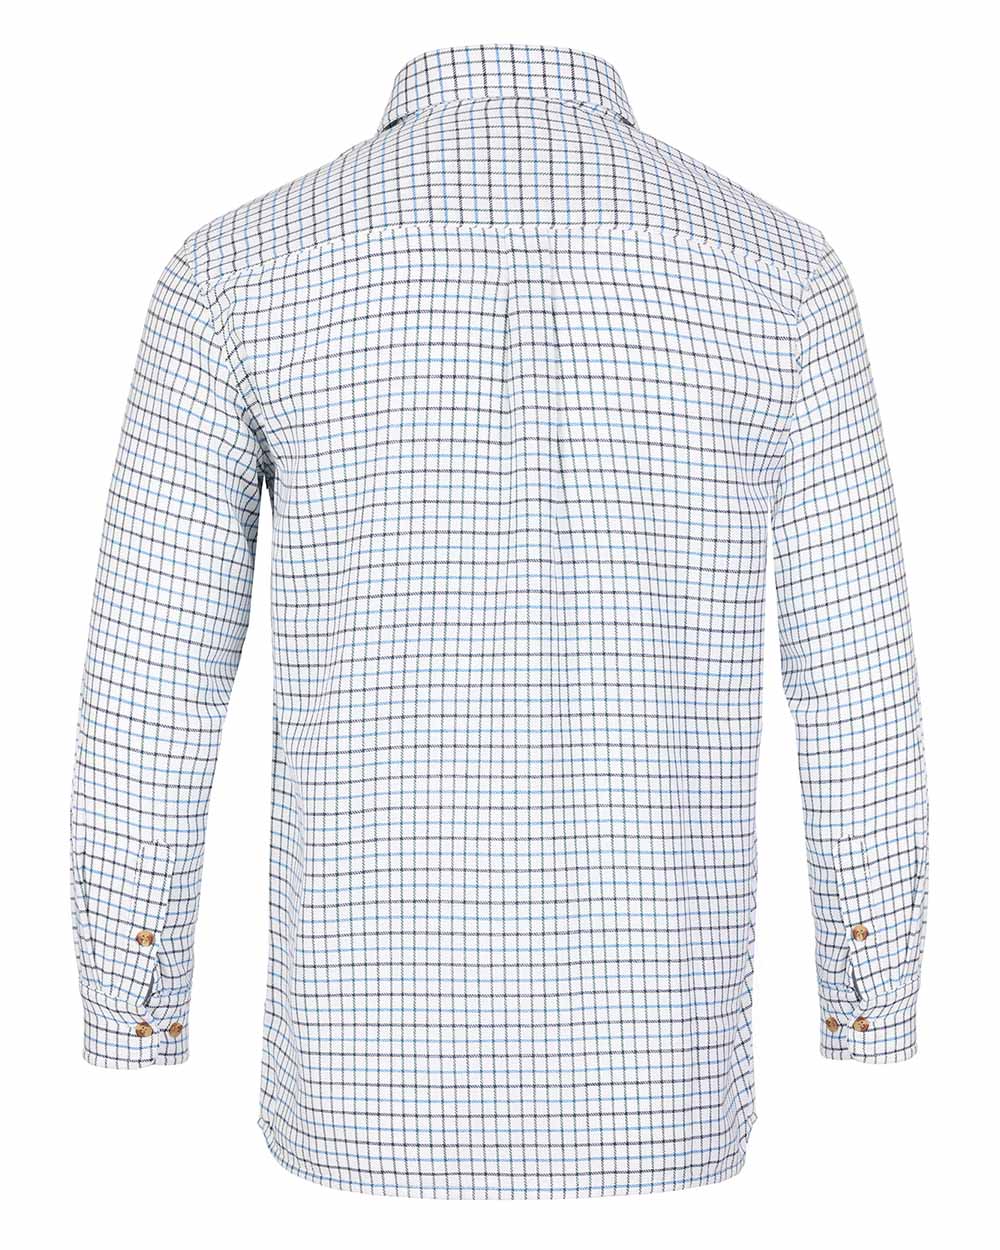 Blue coloured Fort Tattersall Shirt on white background 